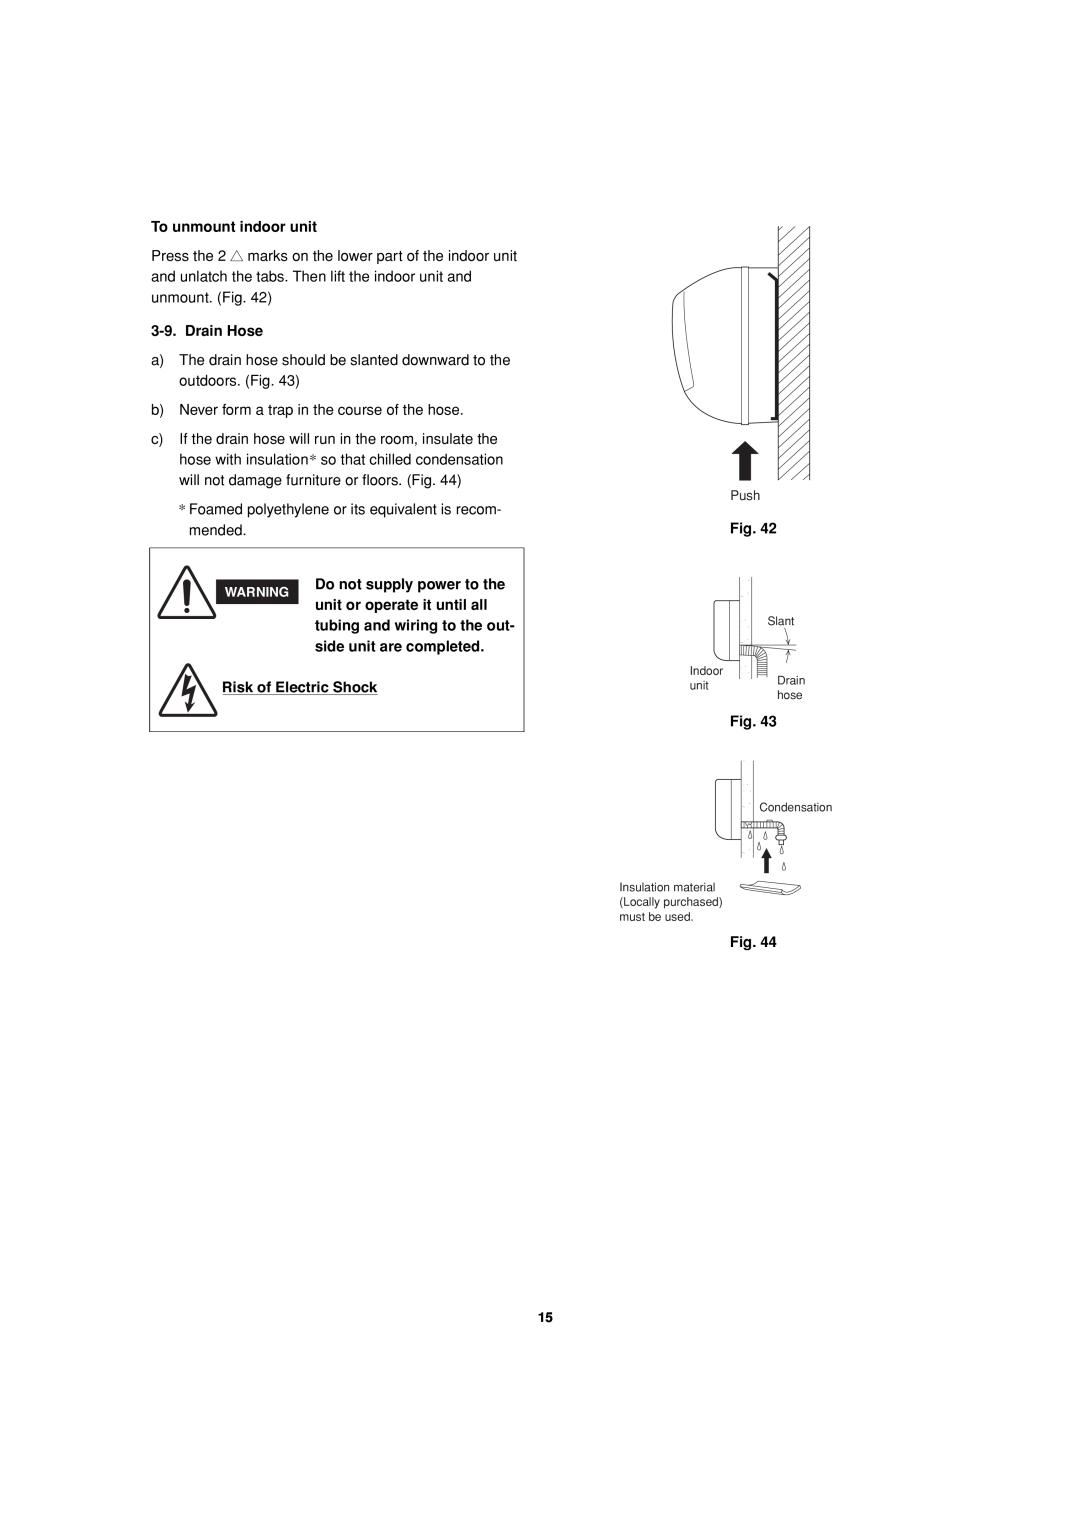 Sanyo KMS2472, KMS1872 service manual To unmount indoor unit, Drain Hose, Risk of Electric Shock 